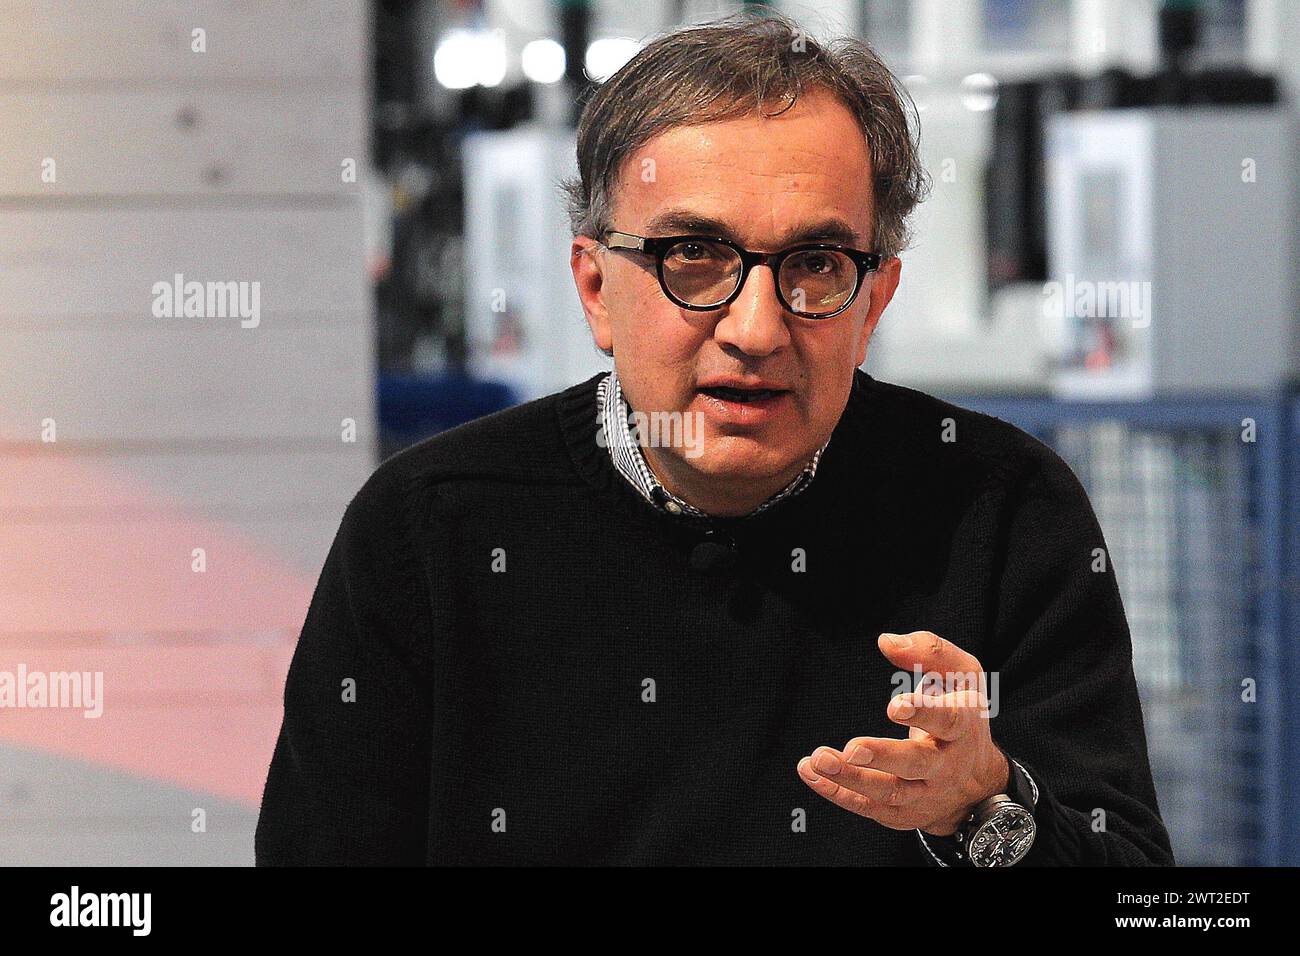 Sergio Marchionne, CEO of the industrial group FCA, during a press conference at the FIAT plant in Pomigliano D'Arco Stock Photo